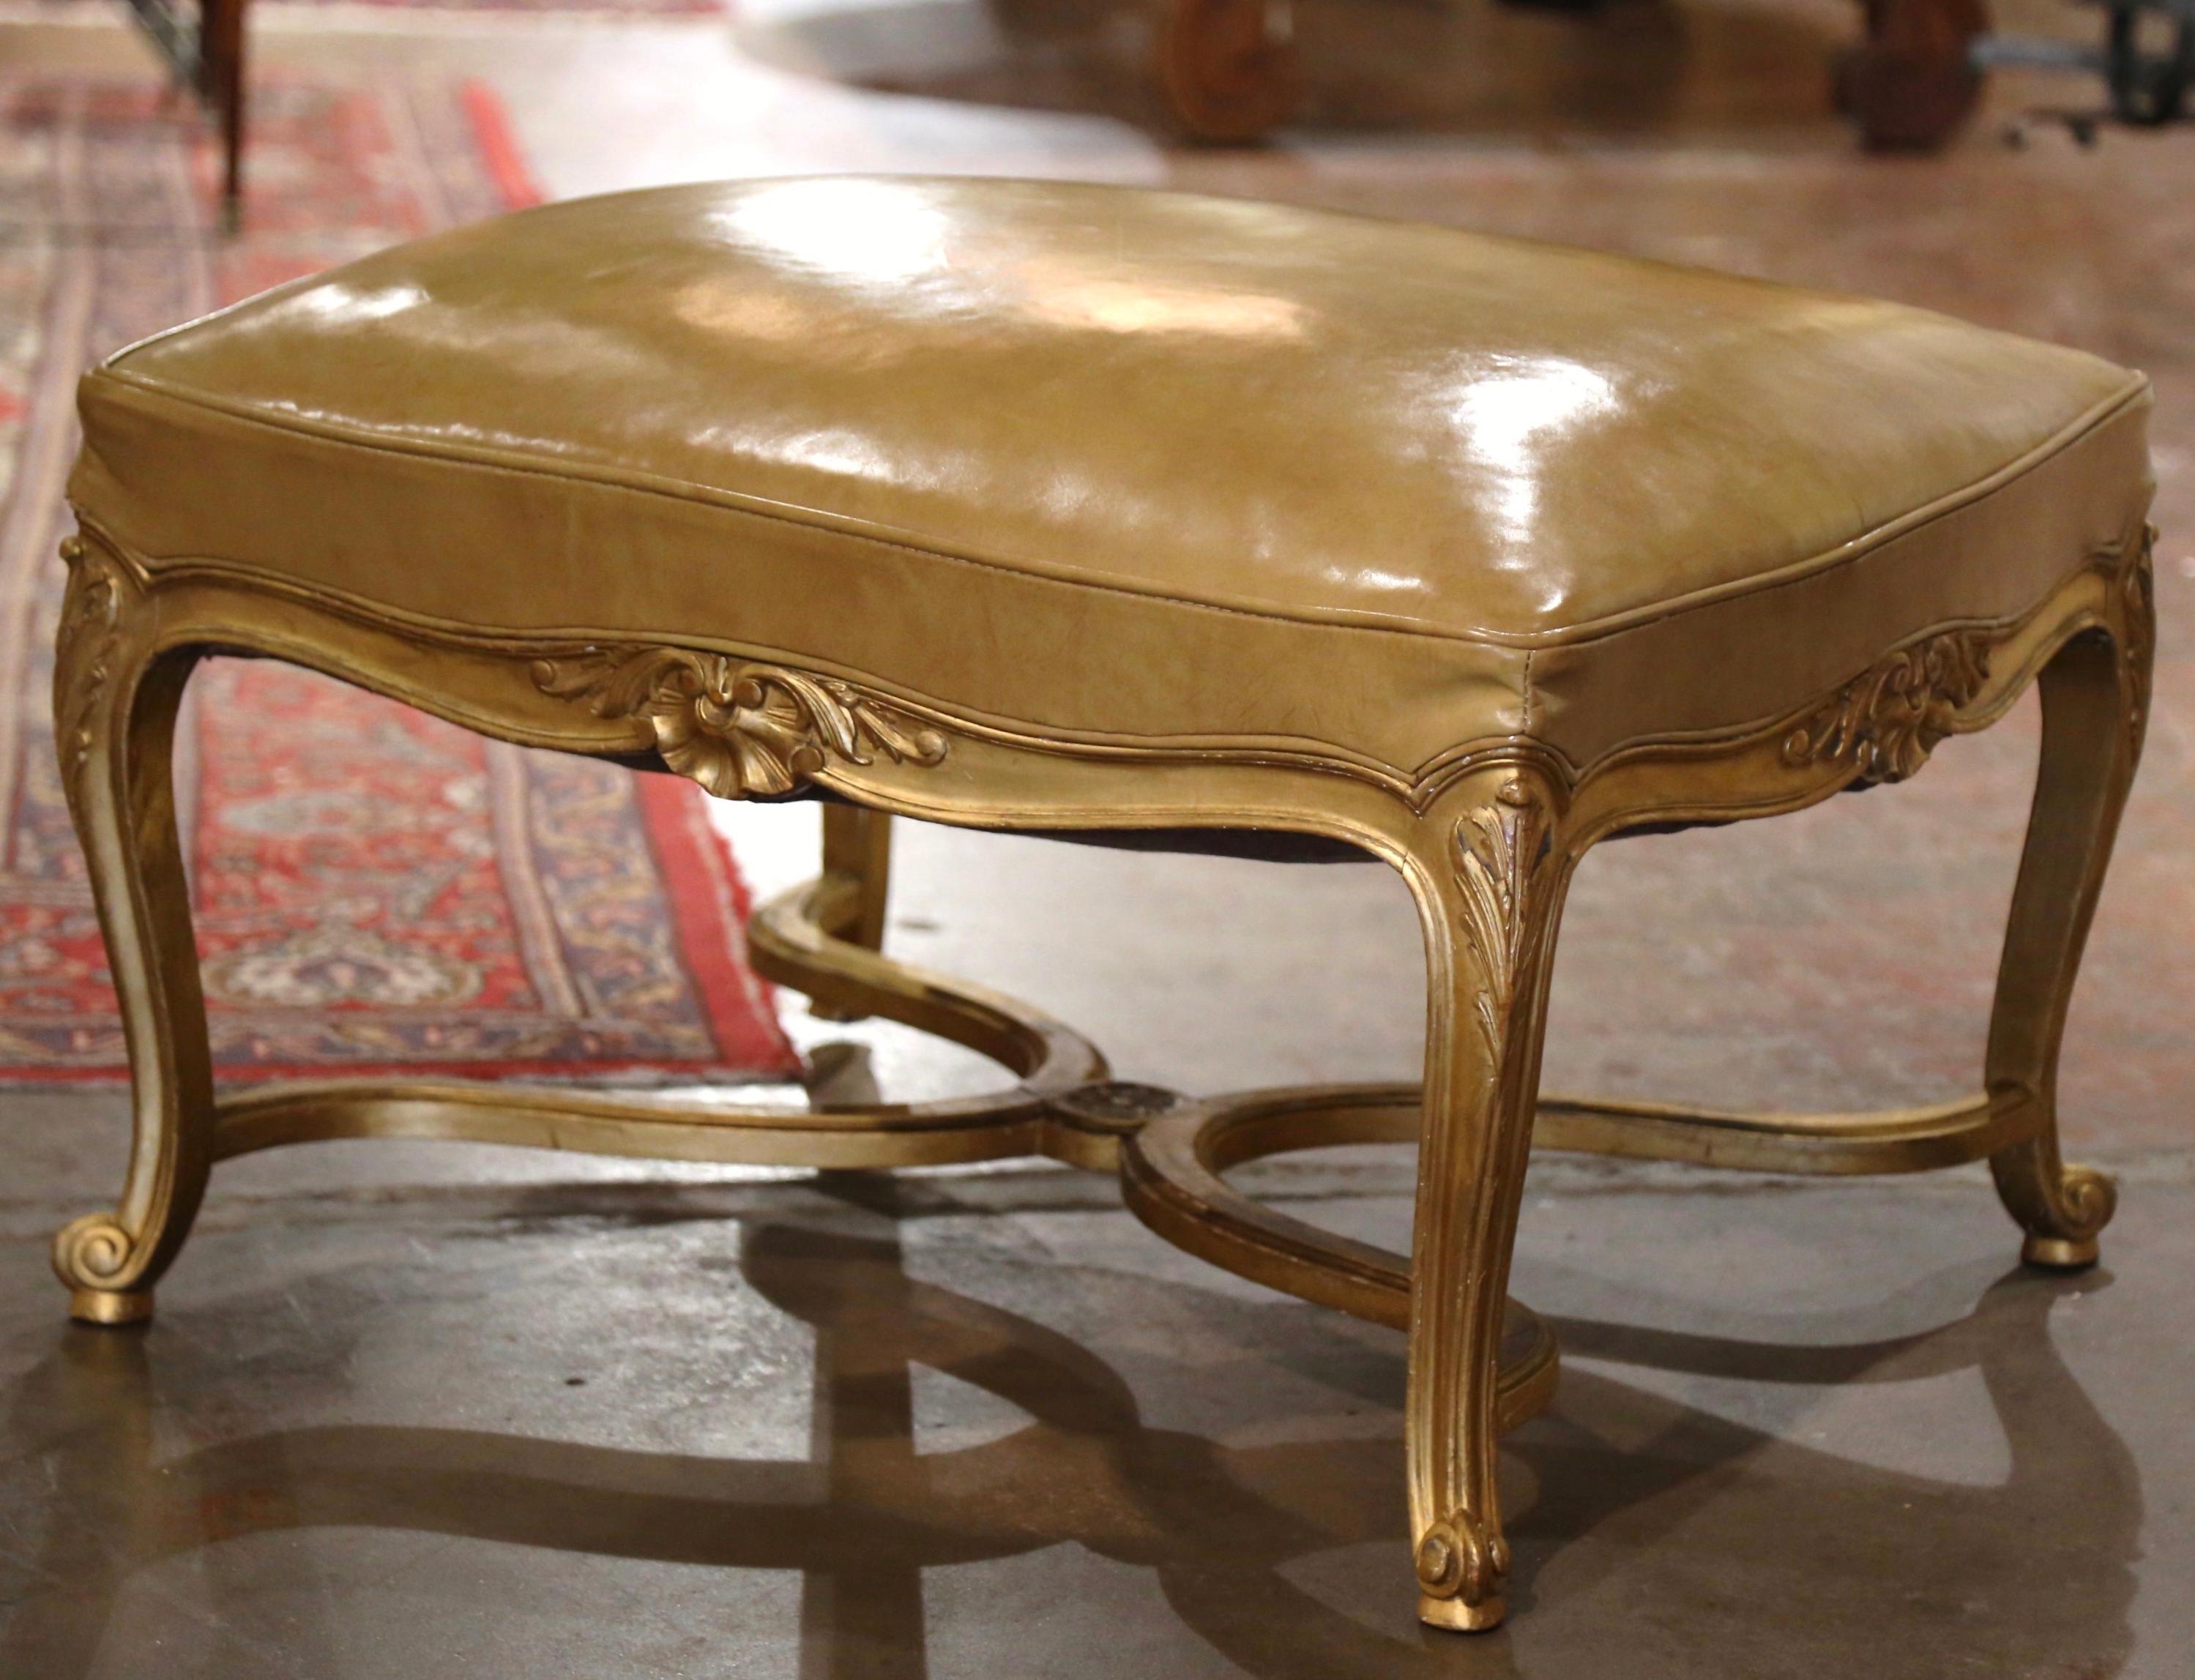 Place this elegant, antique gilt wood bench in your den or living room for extra seating. Crafted in Paris, France, circa 1890, the large traditional stool stands on cabriole legs decorated with acanthus leaf motifs at the shoulders ending with